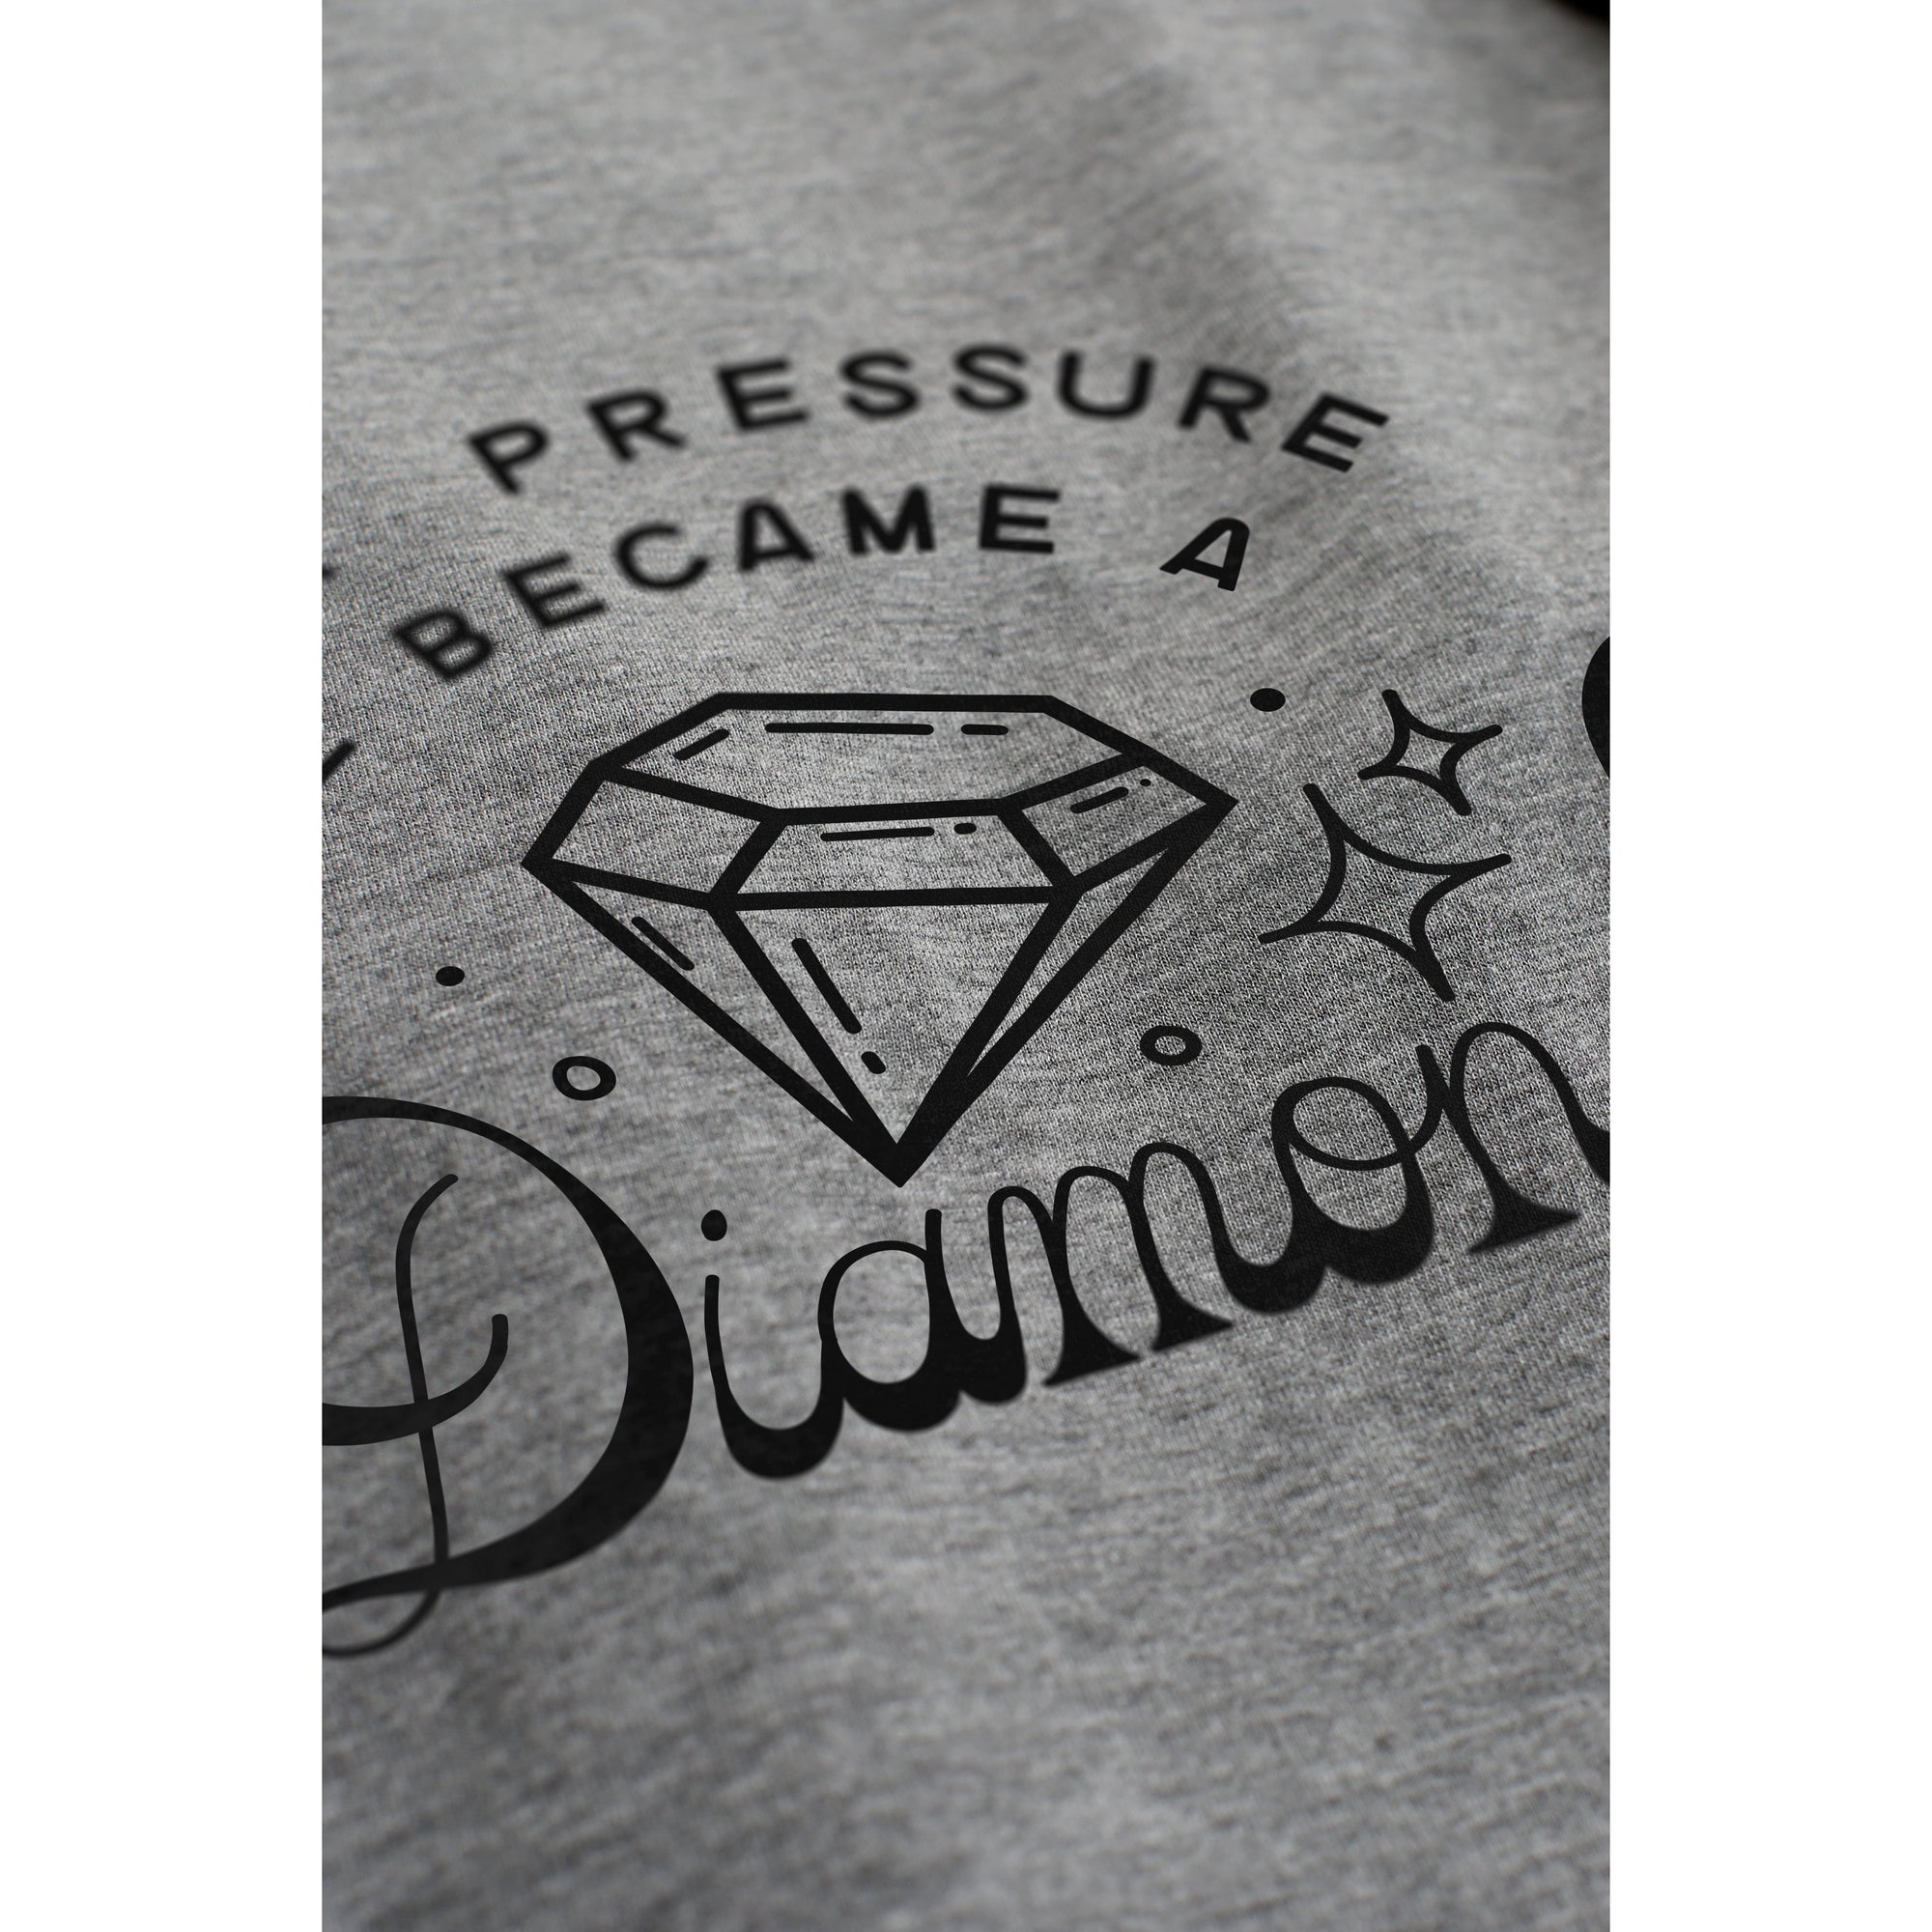 Under Pressure She Became A Diamond - Stories You Can Wear by Thread Tank